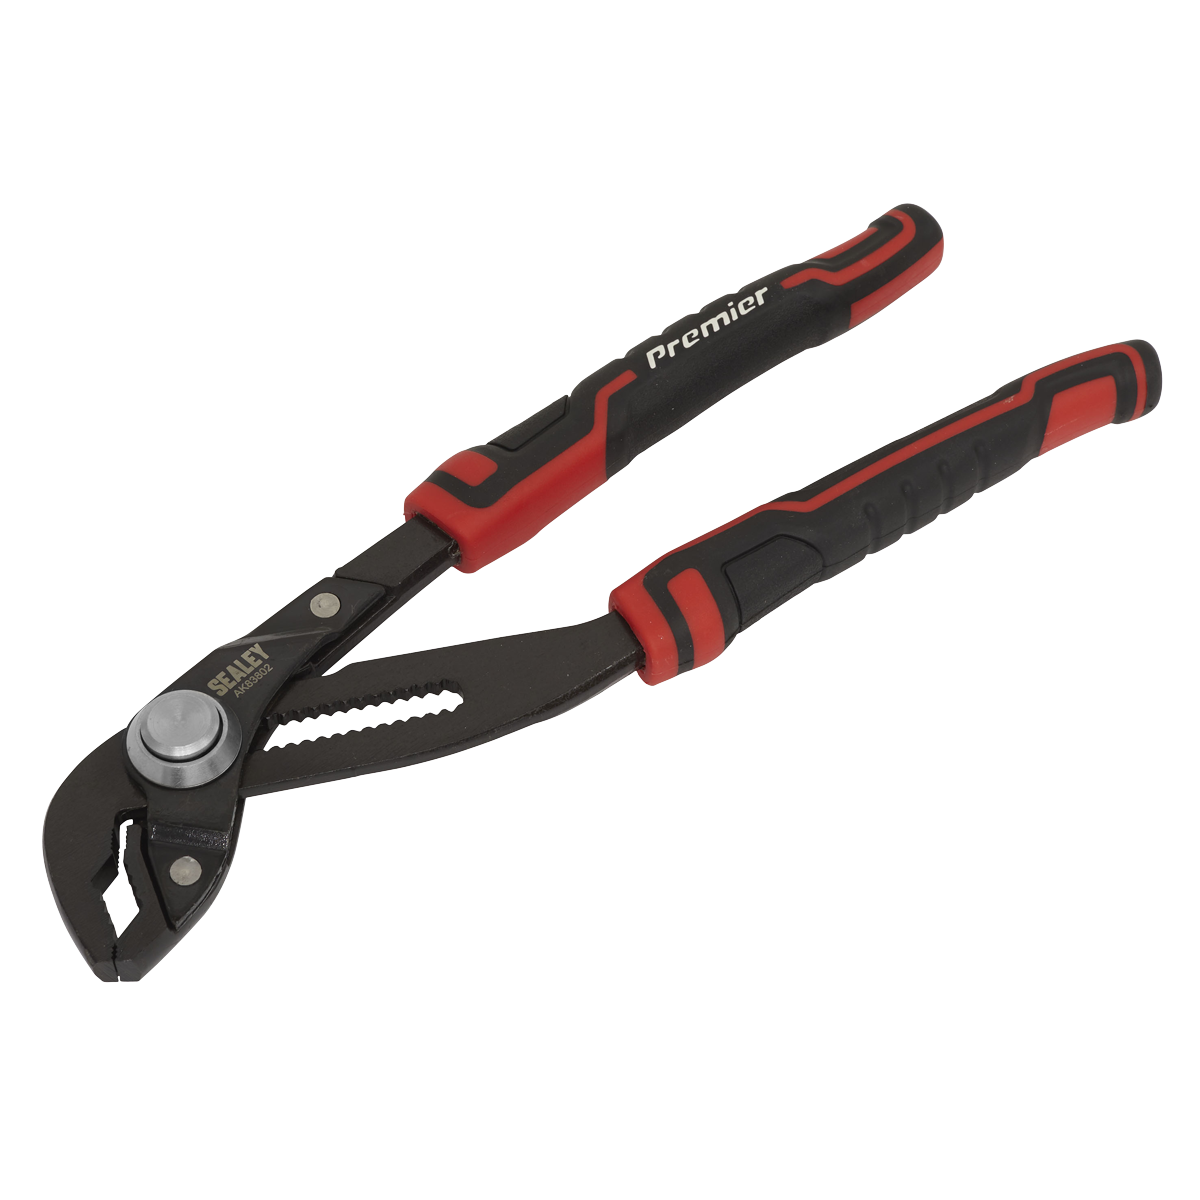 Sealey 250mm Quick Release Water Pump Pliers AK83802